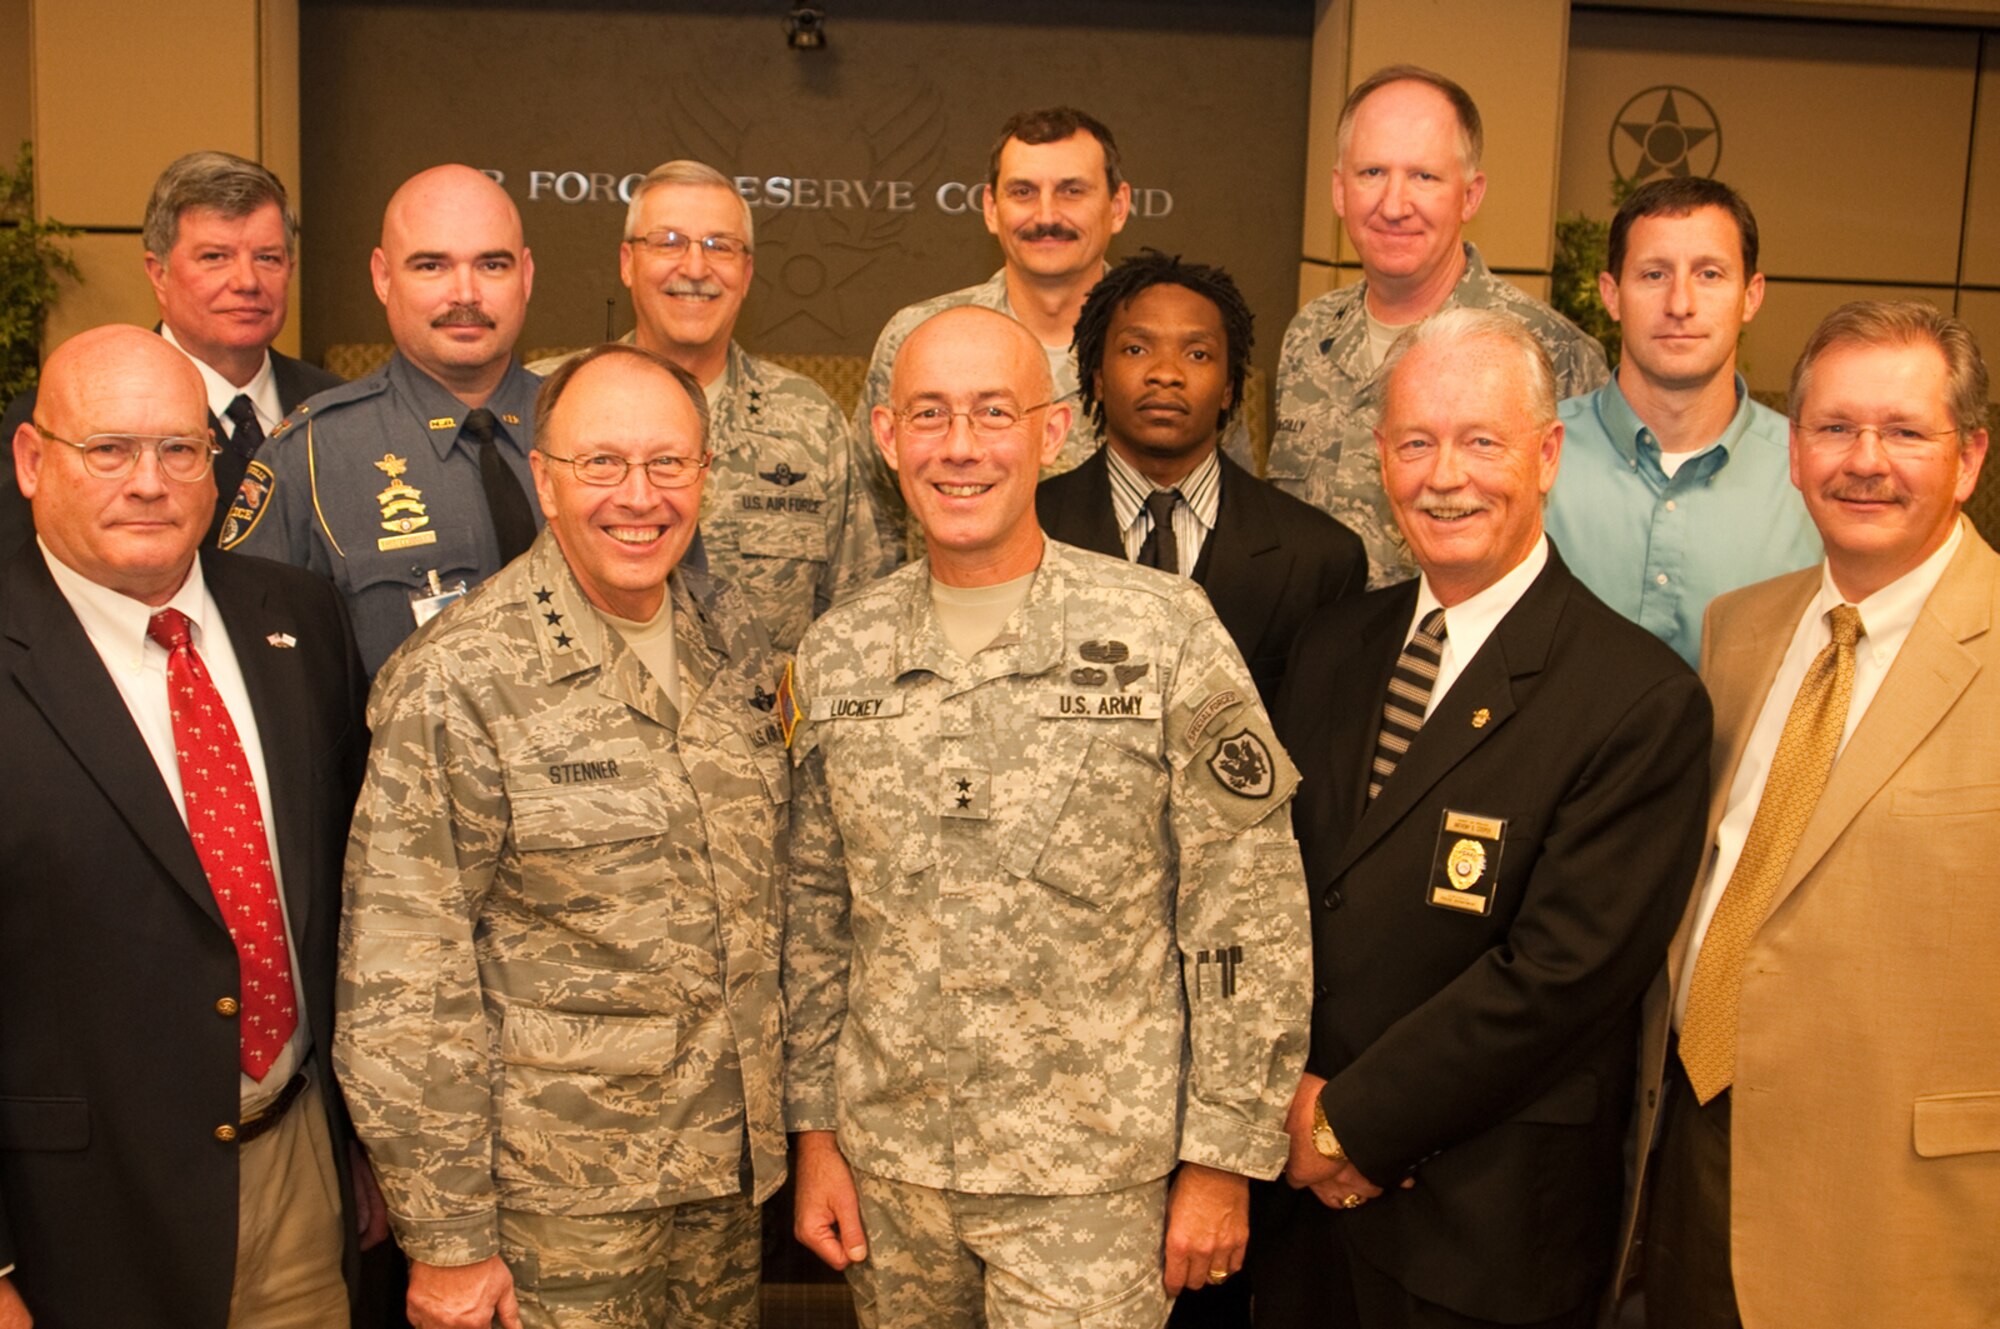 In the foreground, second from left, Lt. Gen. Charles E. Stenner Jr., commander of the Air Force Reserve Command, stands next to Army Maj. Gen. Charles Luckey, assistant chairman to the Joint Chiefs of Staff for Reserve Matters in Washington D.C., as they pose for a photo with Middle Georgia employers Nov. 18, 2010. The generals hosted a luncheon for the employers who received the Employer Support of the Guard and Reserve's Patriot Award. (U.S. Air Force photo/Staff Sgt. Alexy Saltekoff)